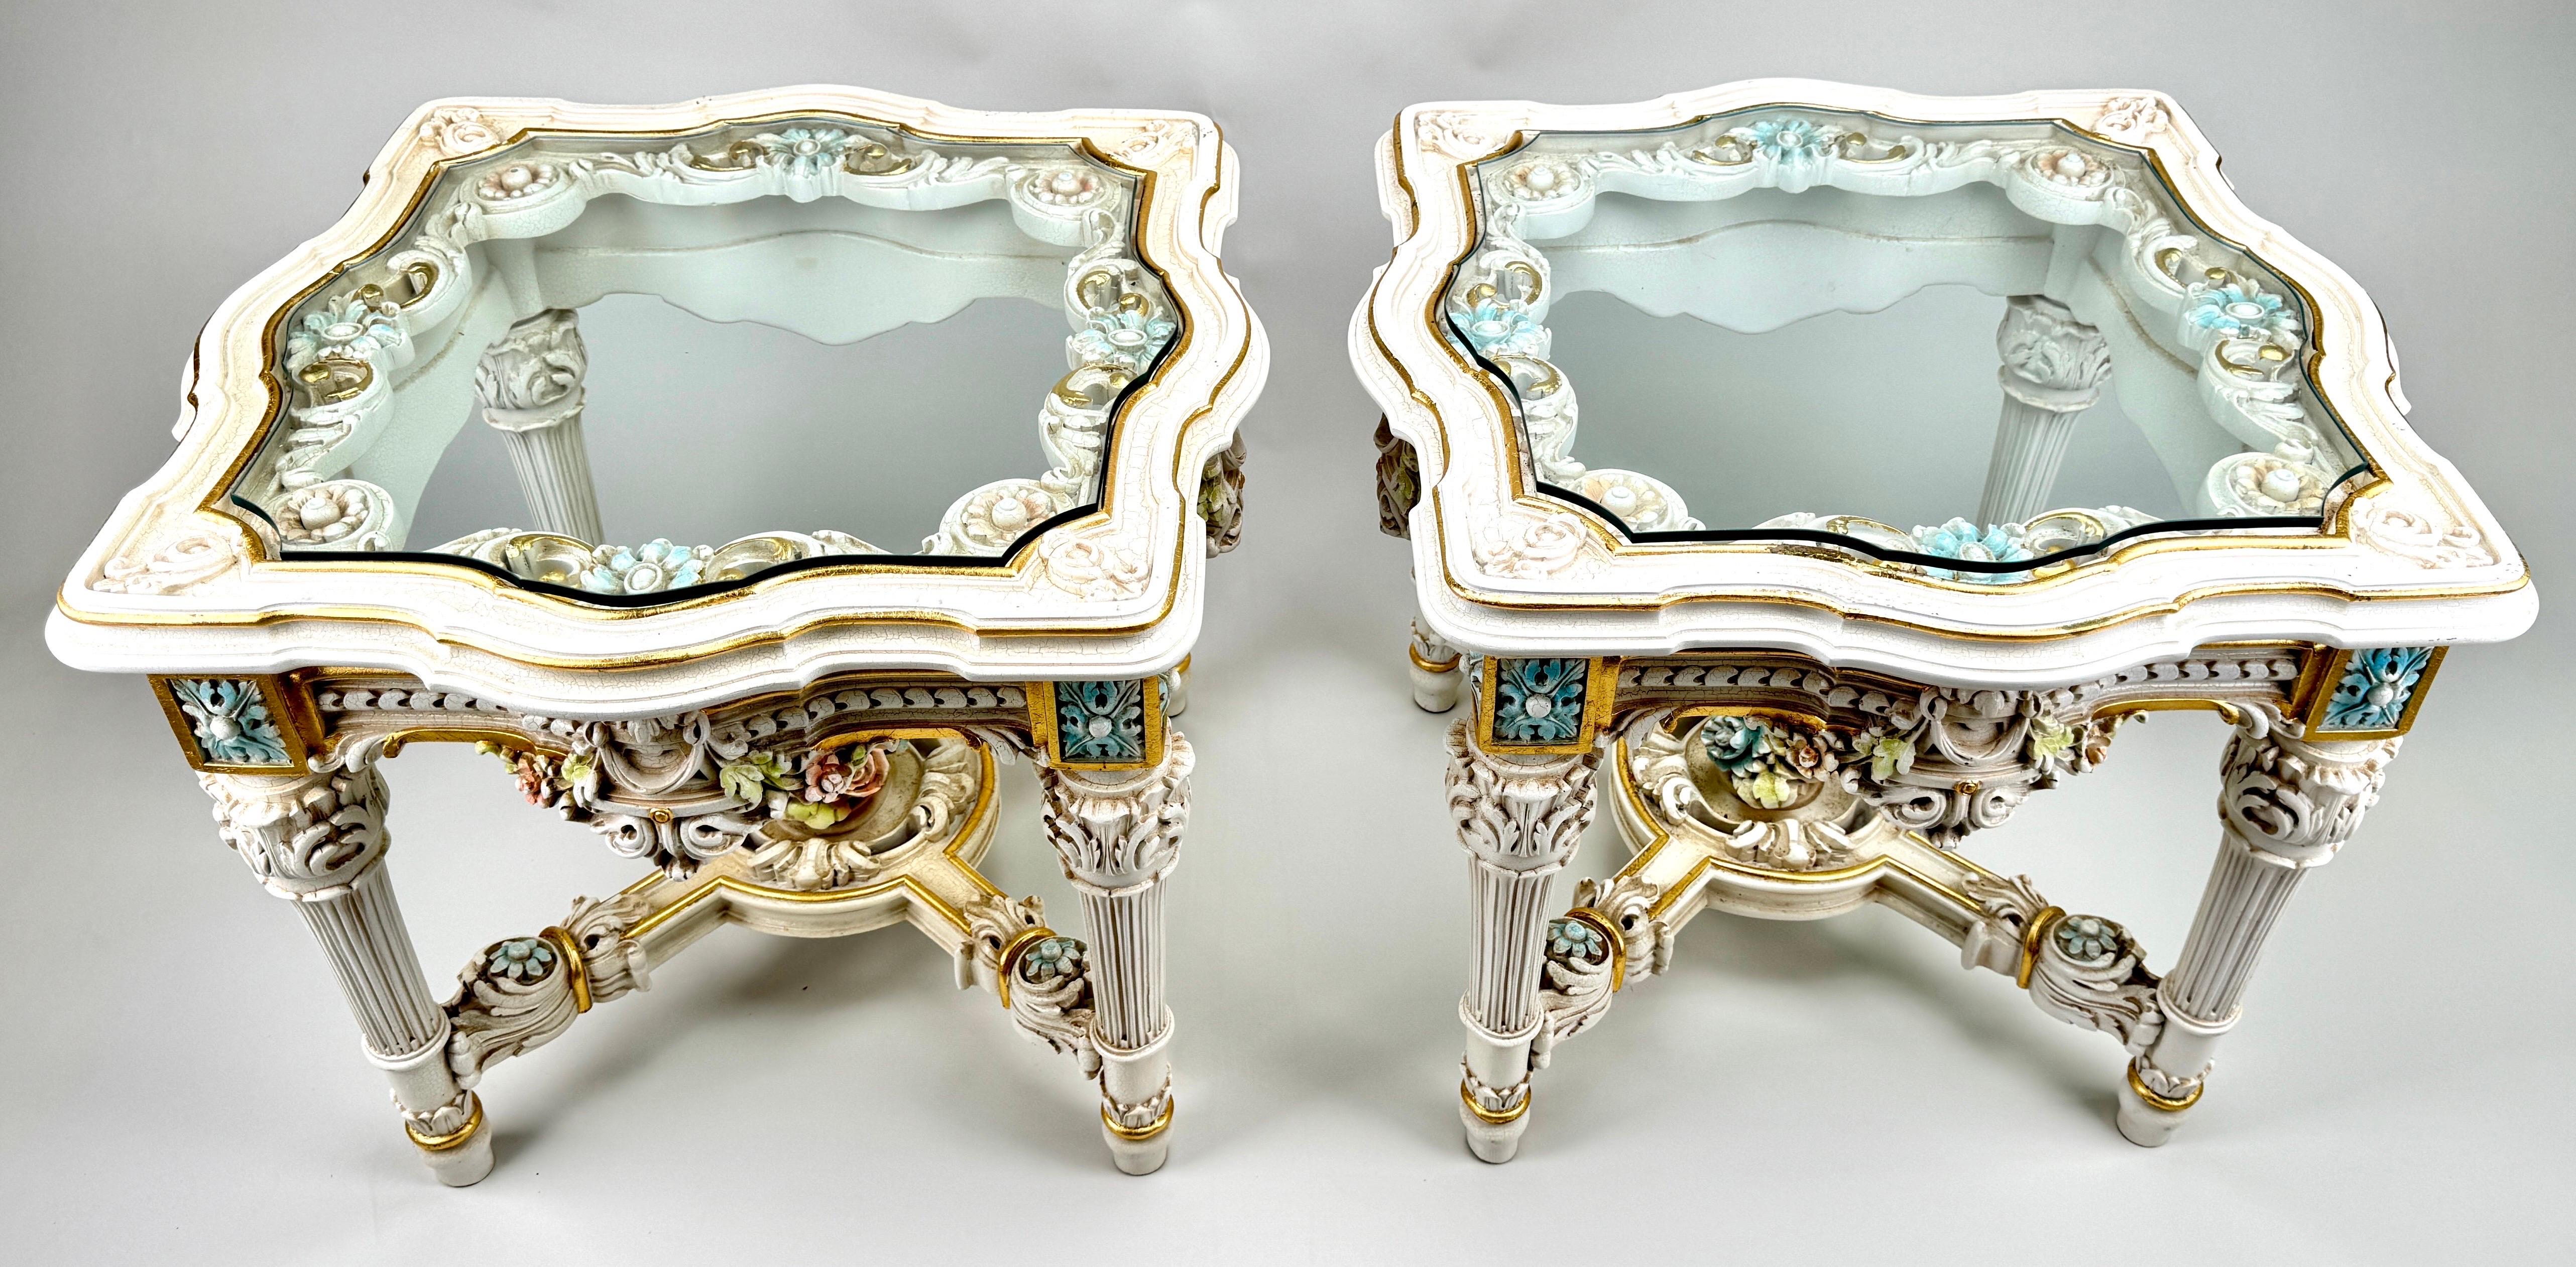 A pair of Italian Neo-Classical Baroque style side or end tables. With an unwavering commitment to craftsmanship, these tables are meticulously crafted to perfection.
Adorned with finely carved floral motifs, the pair of end tables are study and